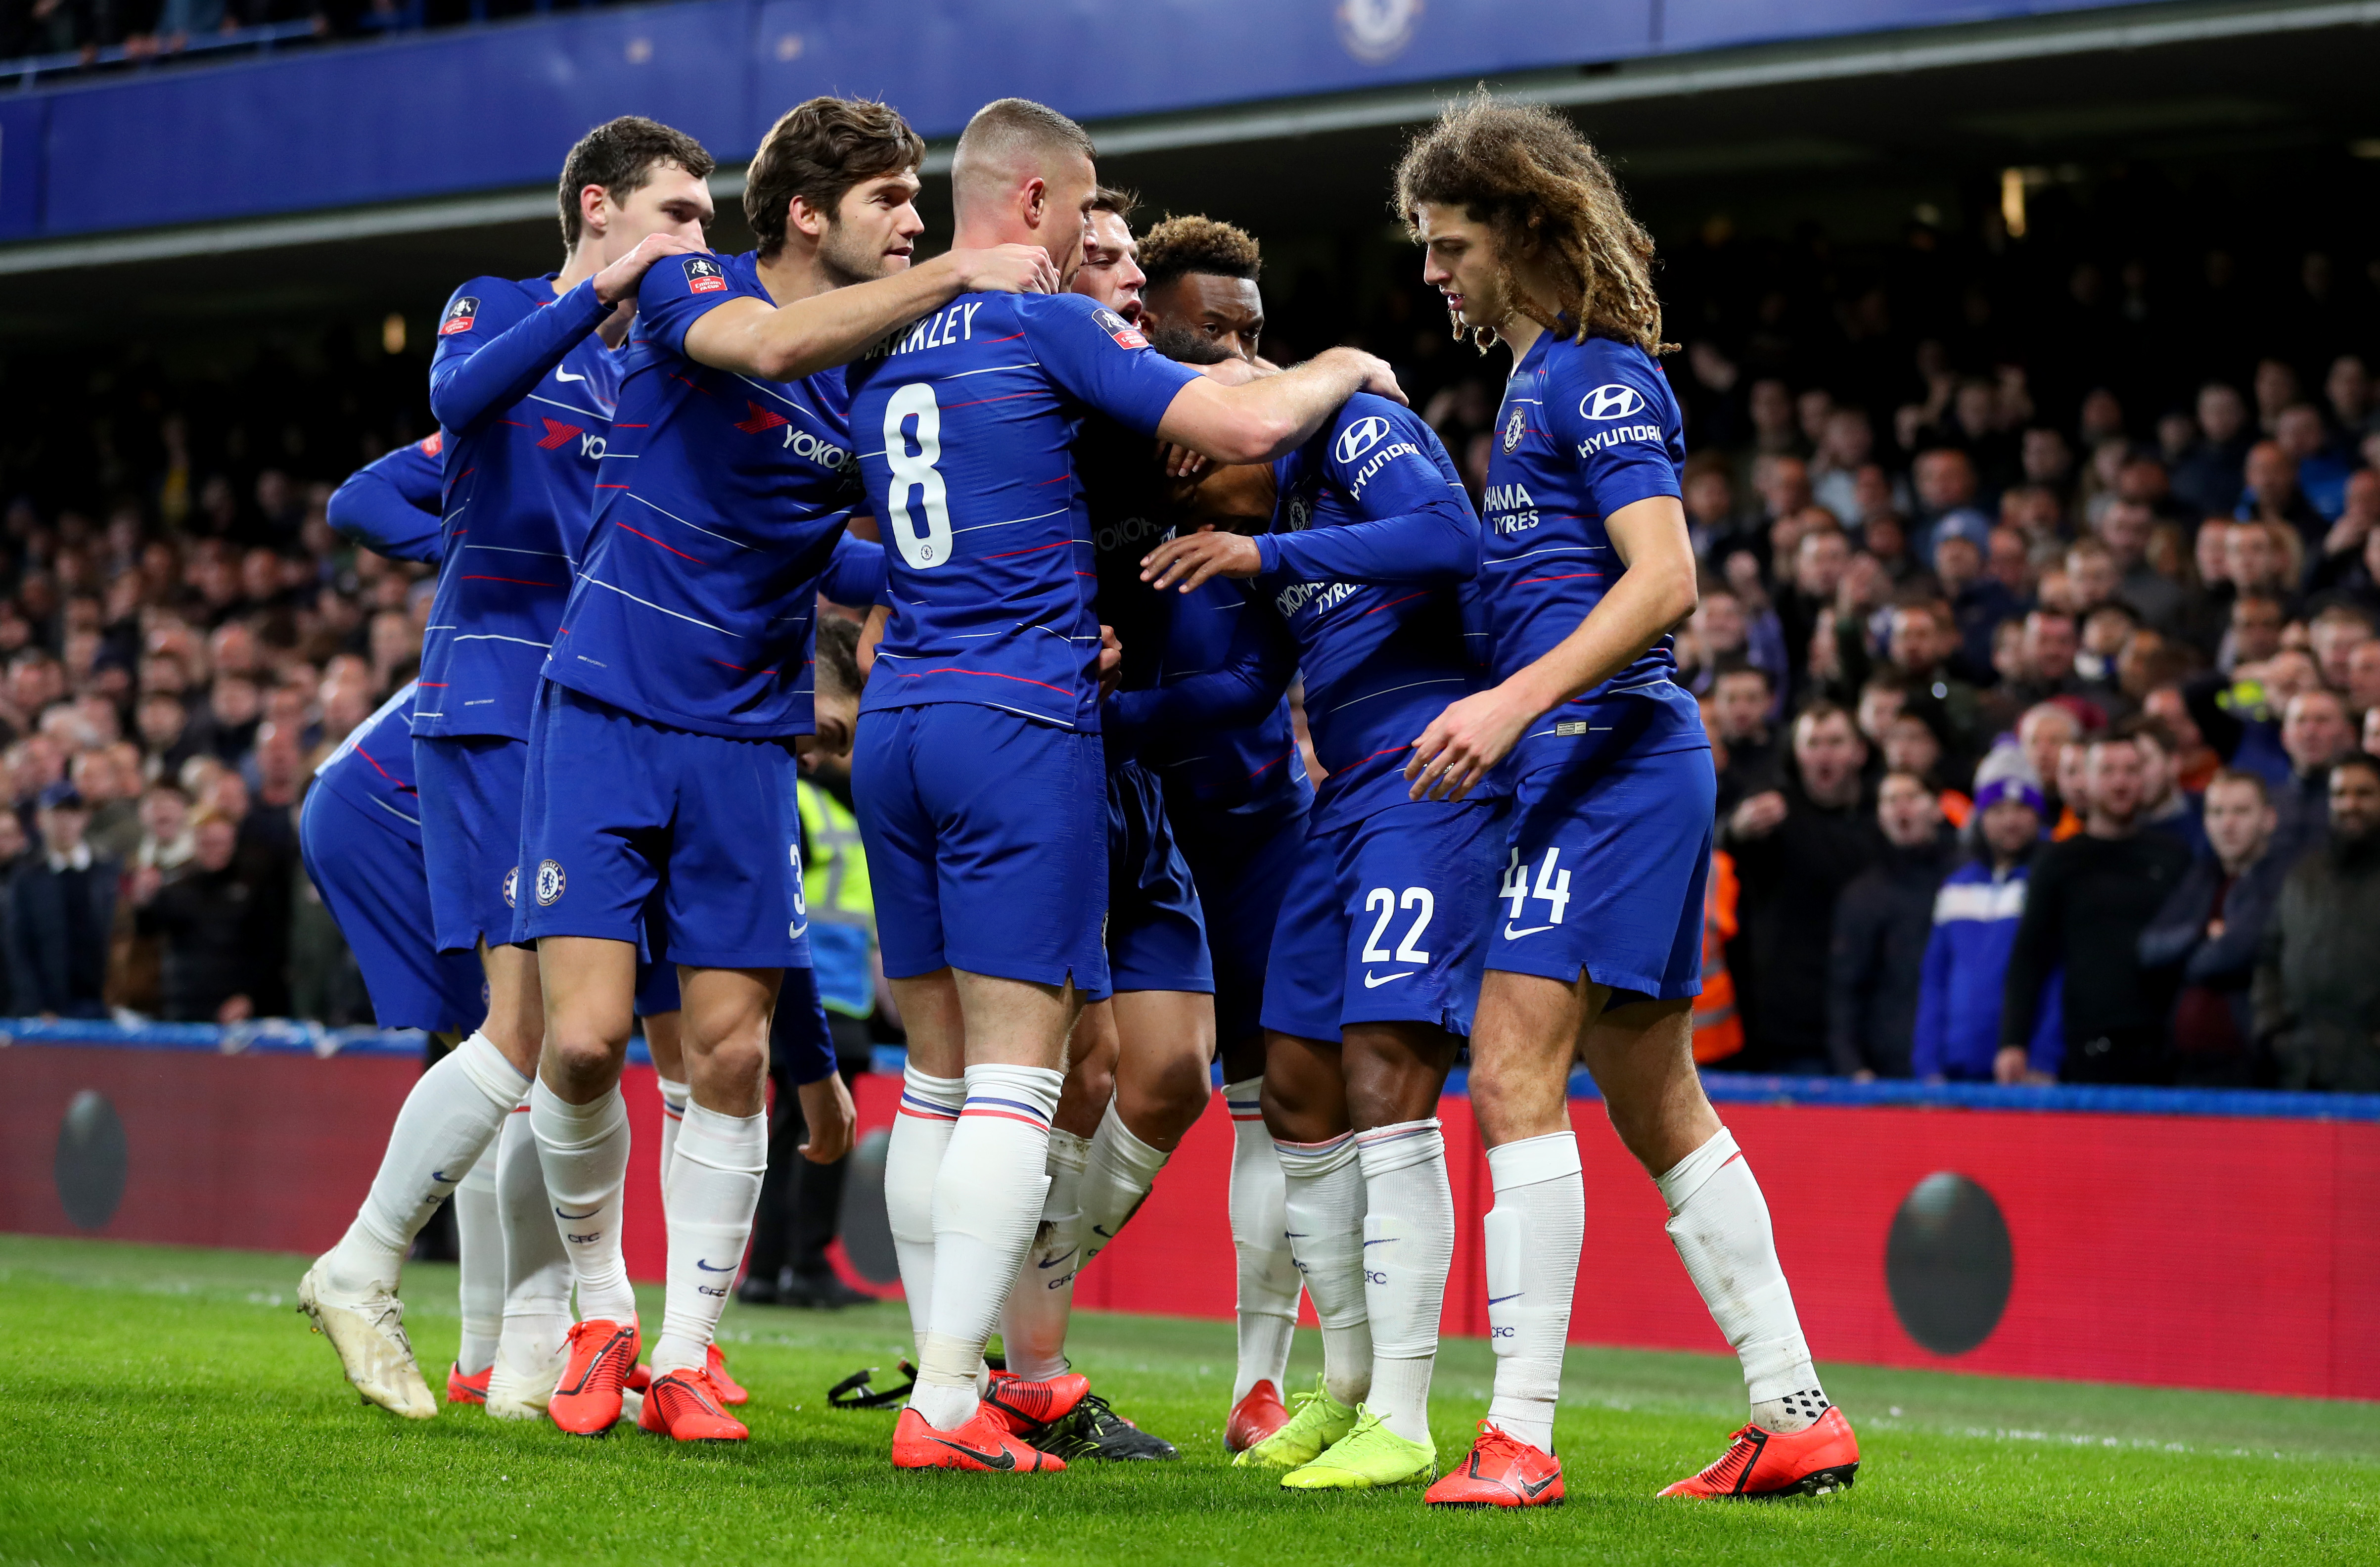 LONDON, ENGLAND - JANUARY 27: Willian of Chelsea celebrates after scoring his team's first goal with his team mates during the FA Cup Fourth Round match between Chelsea and Sheffield Wednesday at Stamford Bridge on January 27, 2019 in London, United Kingdom.  (Photo by Catherine Ivill/Getty Images)